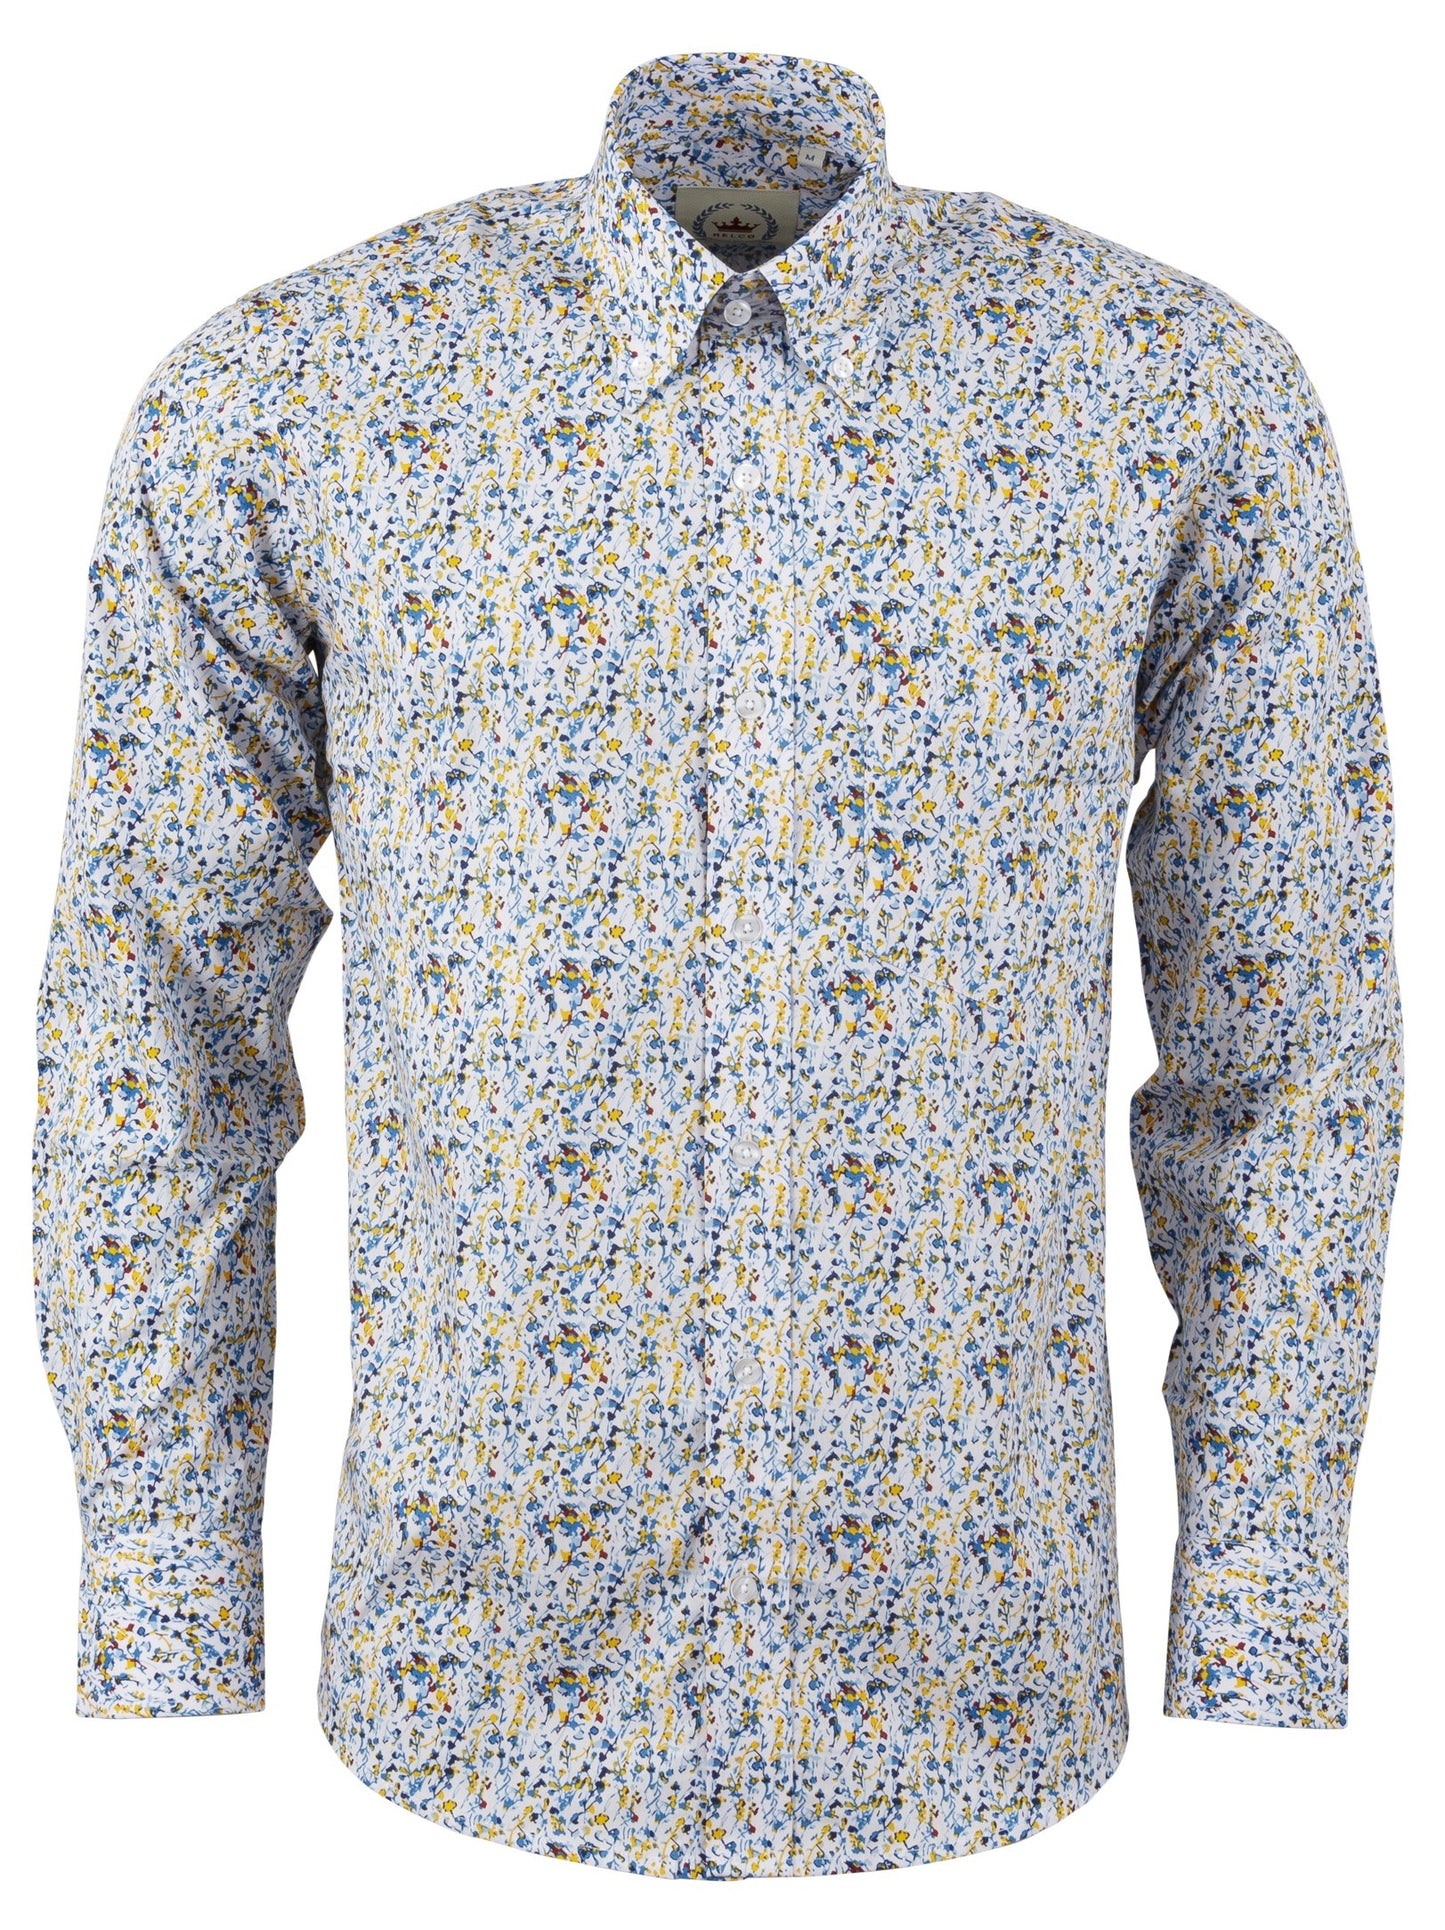 Relco Yellow/Blue Floral Long Sleeved Retro Mod Button Down Shirt